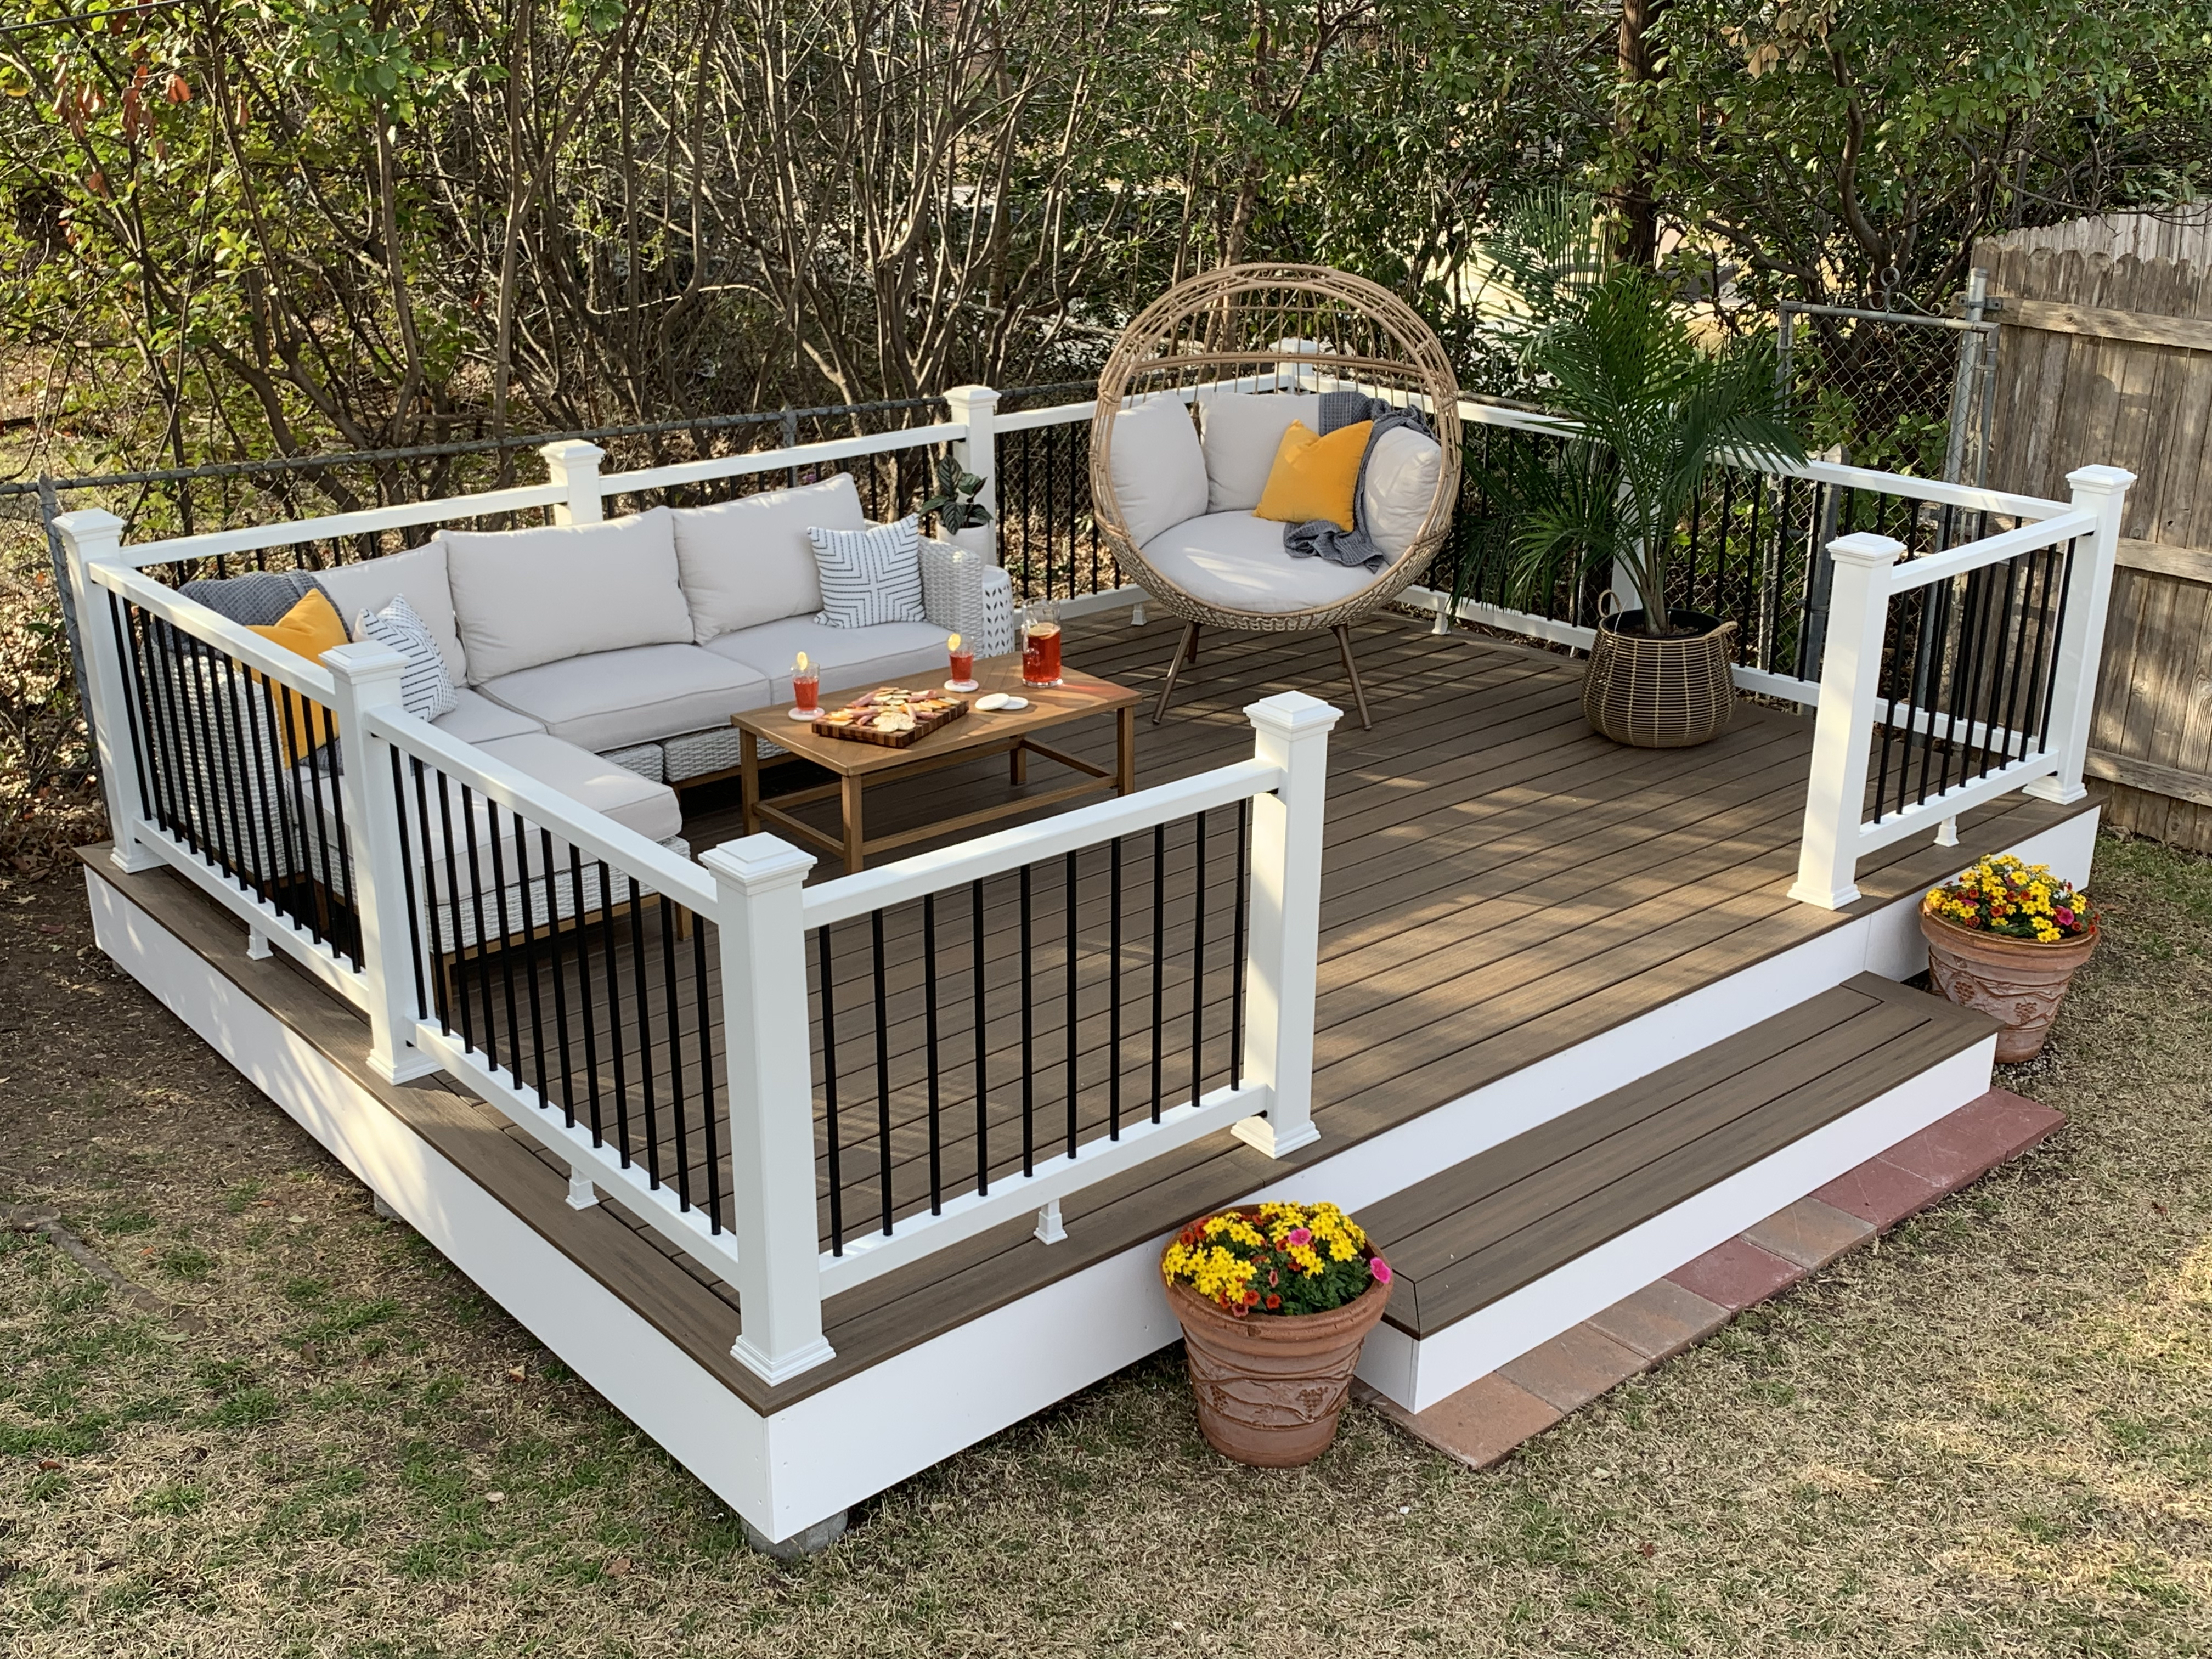 https://www.trex.com/content/dam/trex/images/products/residential/decking/enhance/beauty/toasted-sand/enh-texas-010-ts-enh-railing-wt-sitting-area-wide-high-angle.jpeg